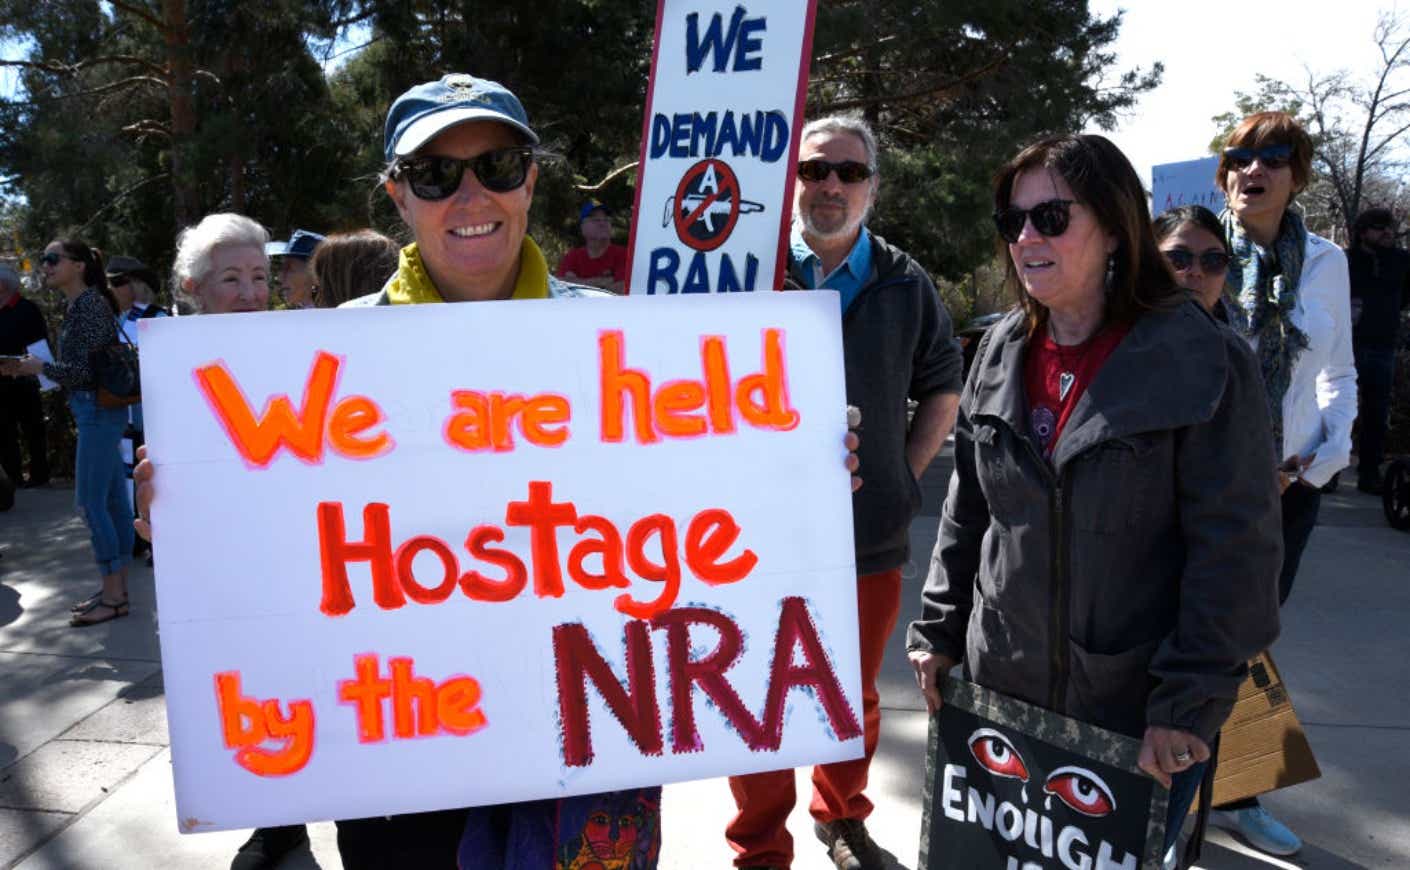 A protestor holds a sign saying "We are held hostage by the NRA"